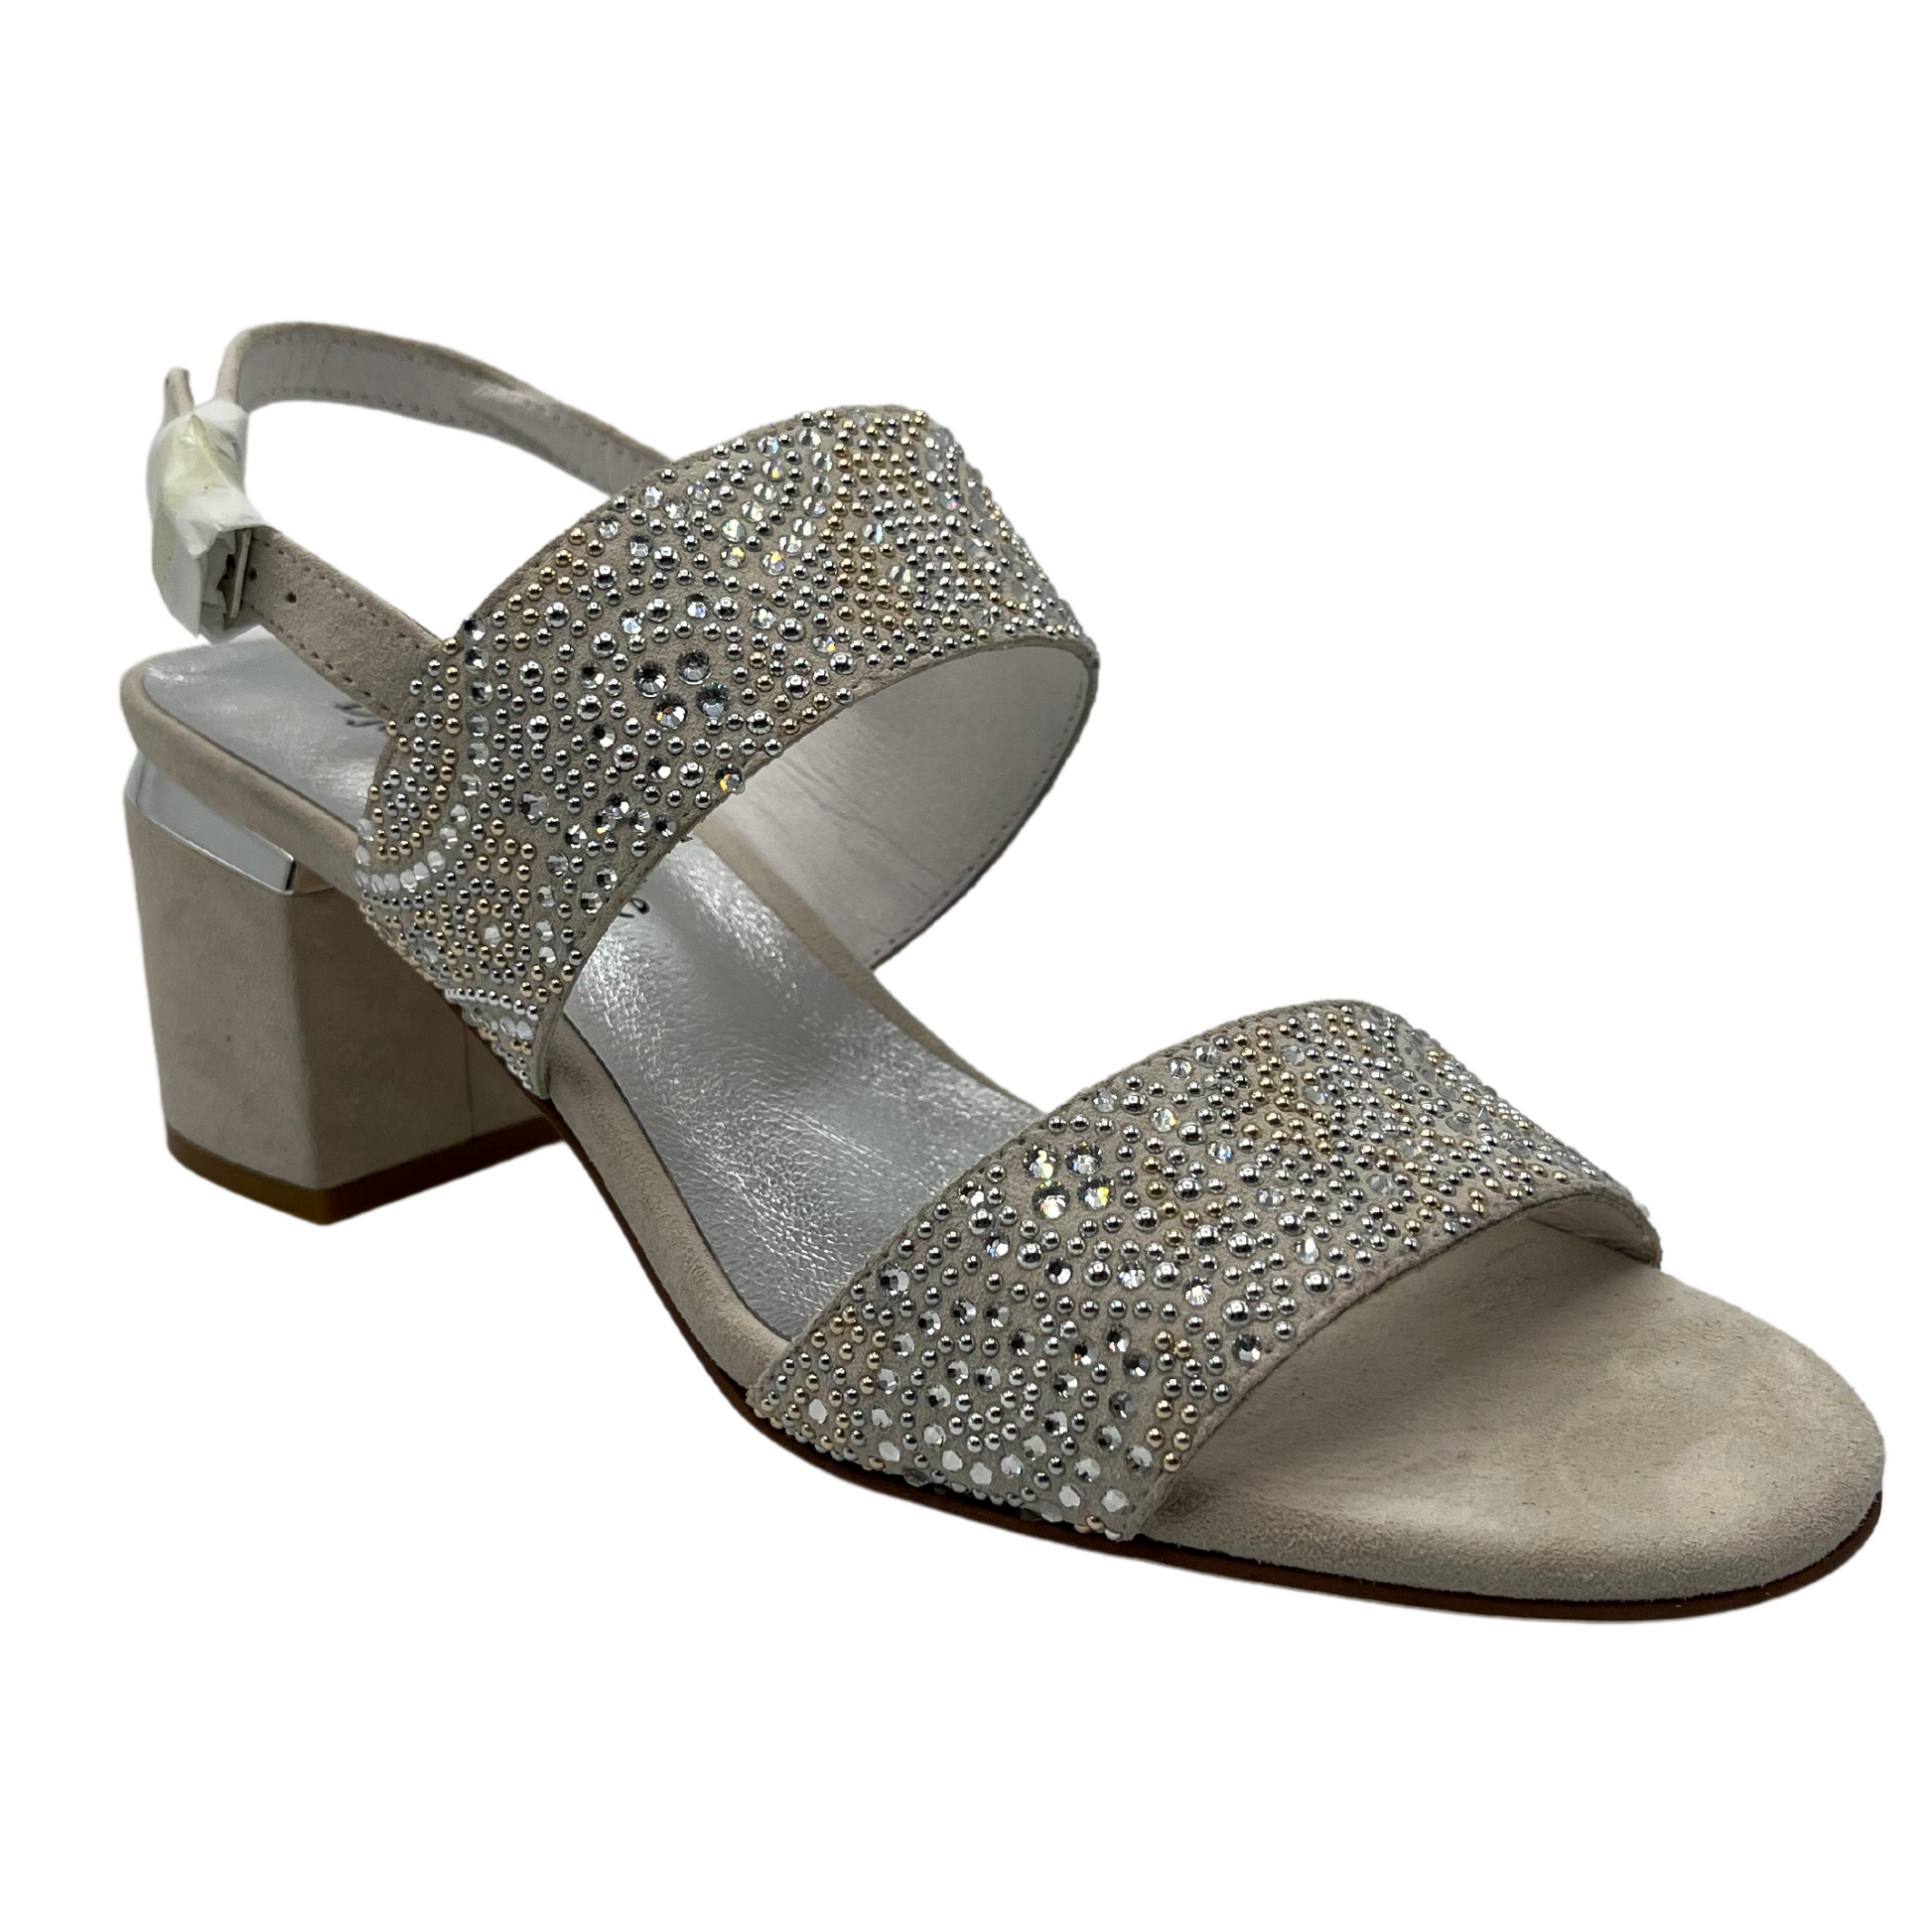 45 degree angled view of silver suede and leather sandal with beaded details and sling back strap